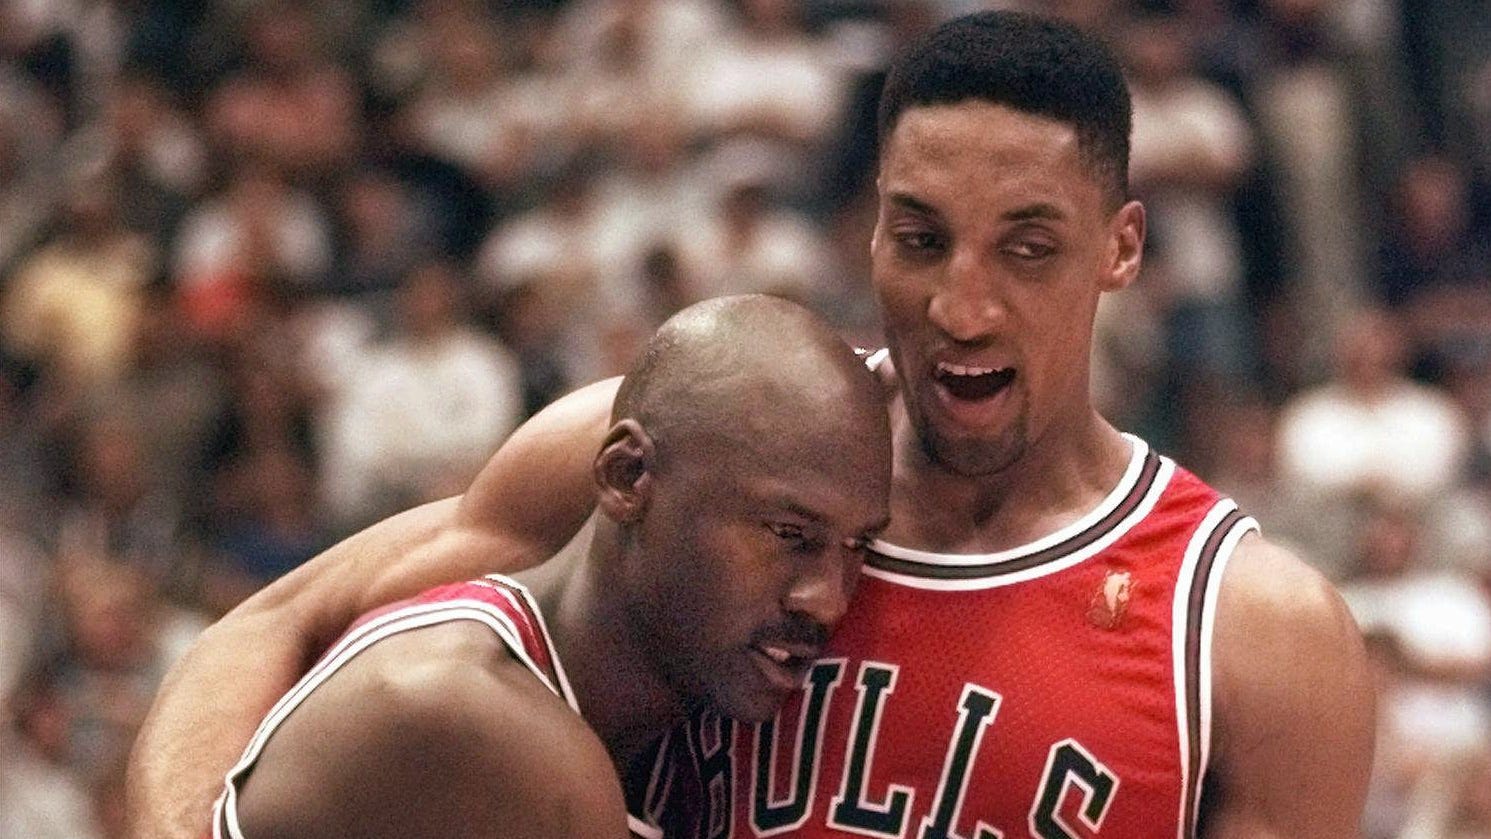 Lore and impact of Michael Jordan's 1997 'Flu Game' still relevant 24 years later